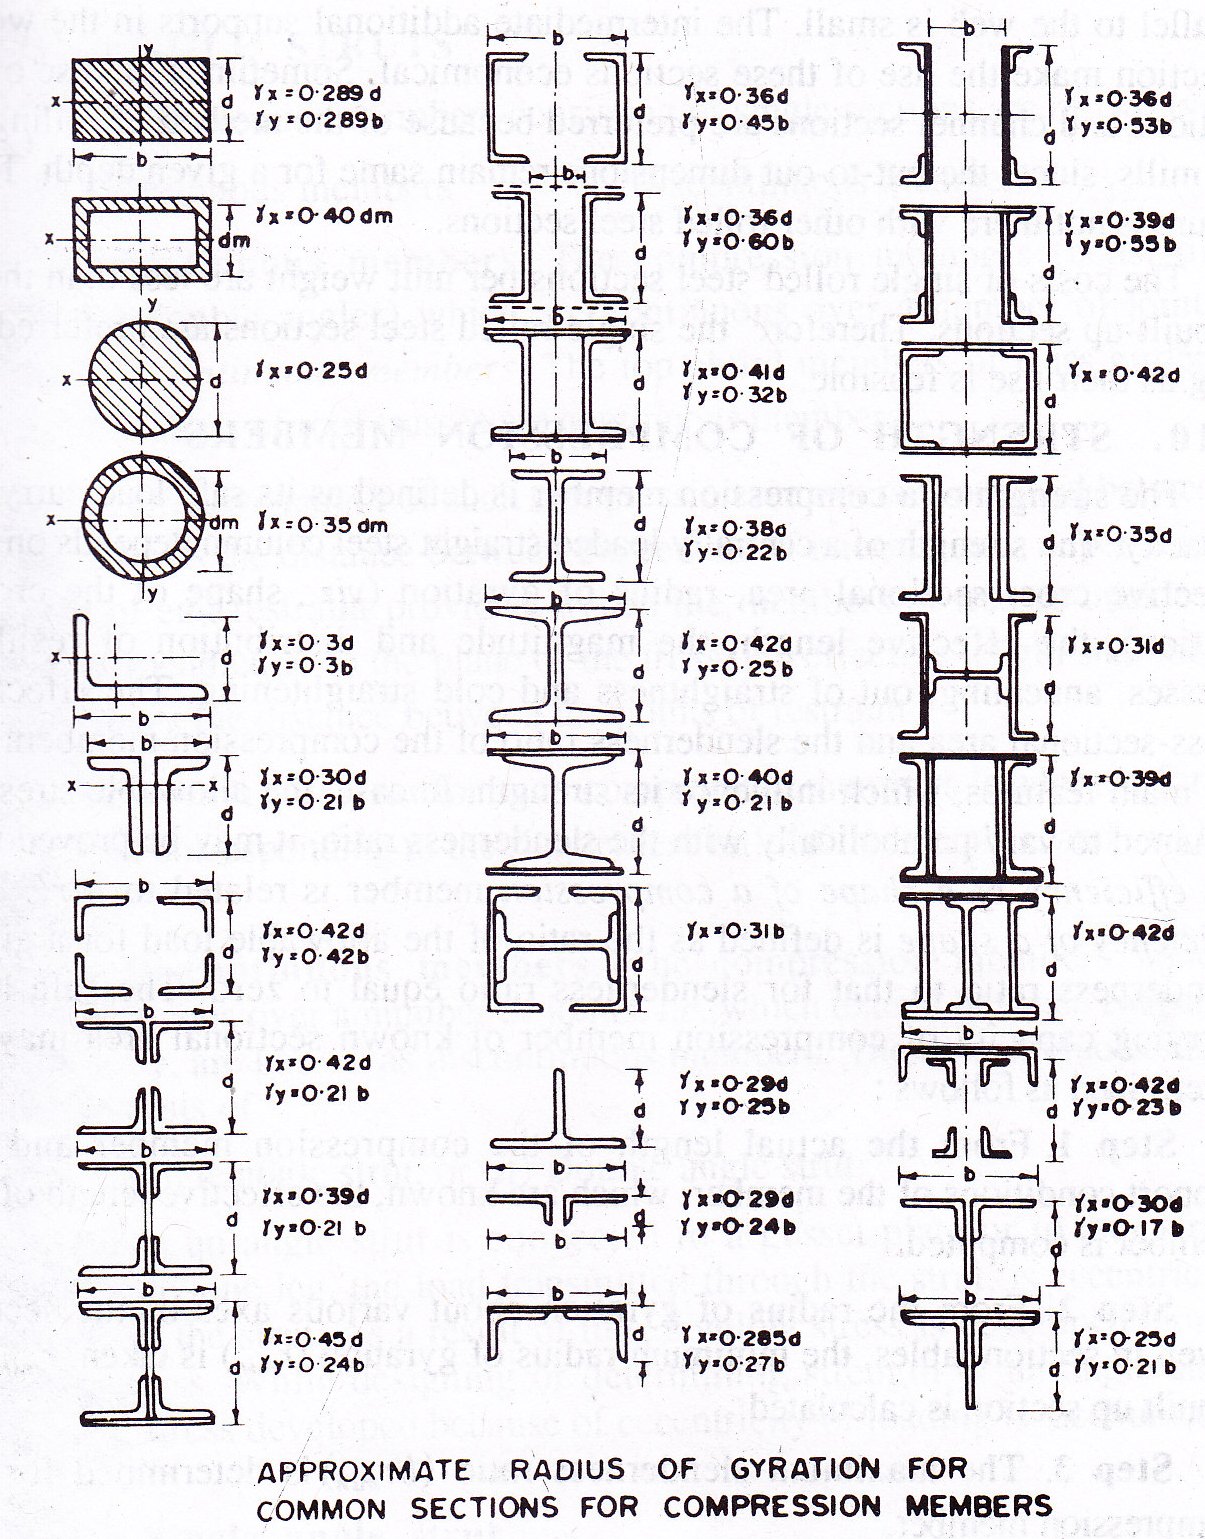 11.1 Column sections for compression members